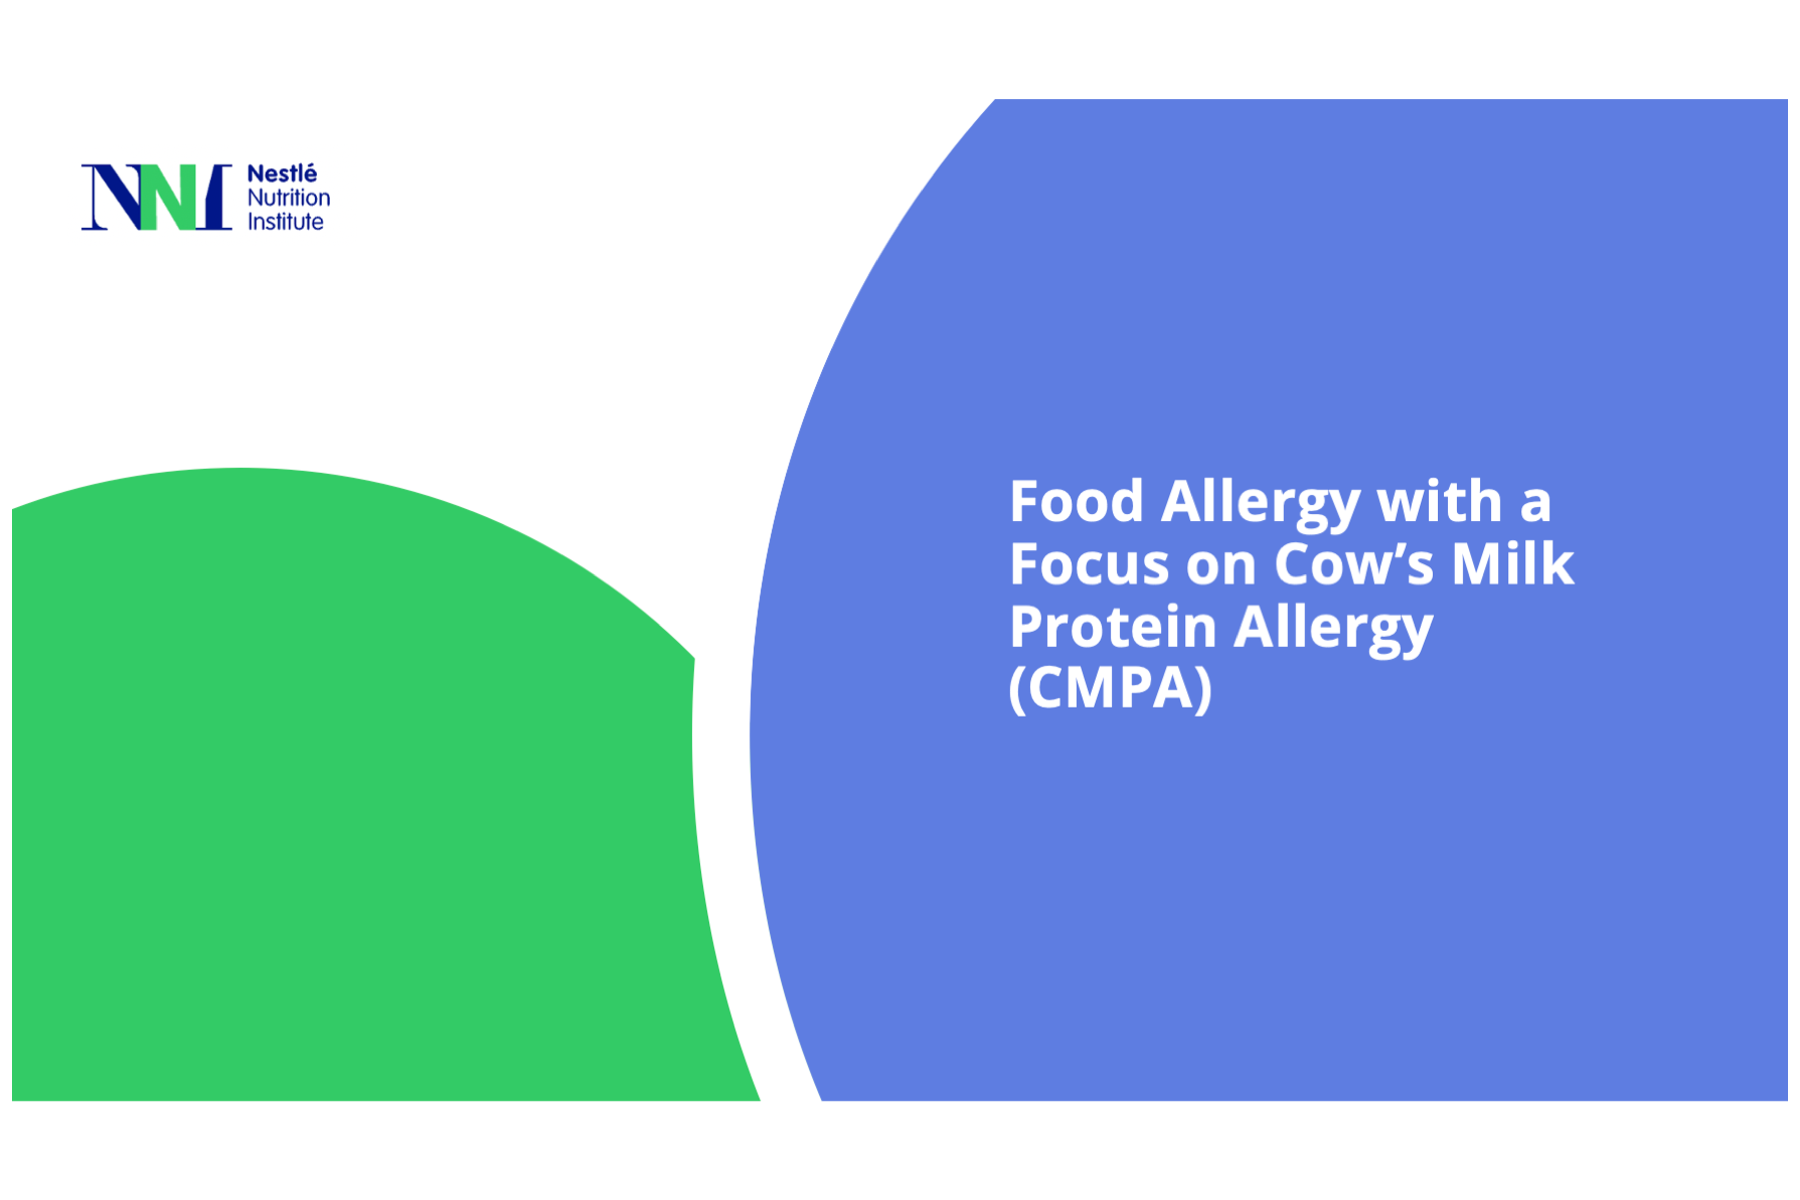 Food allergy with a focus on Cow's Milk Protein Allergy